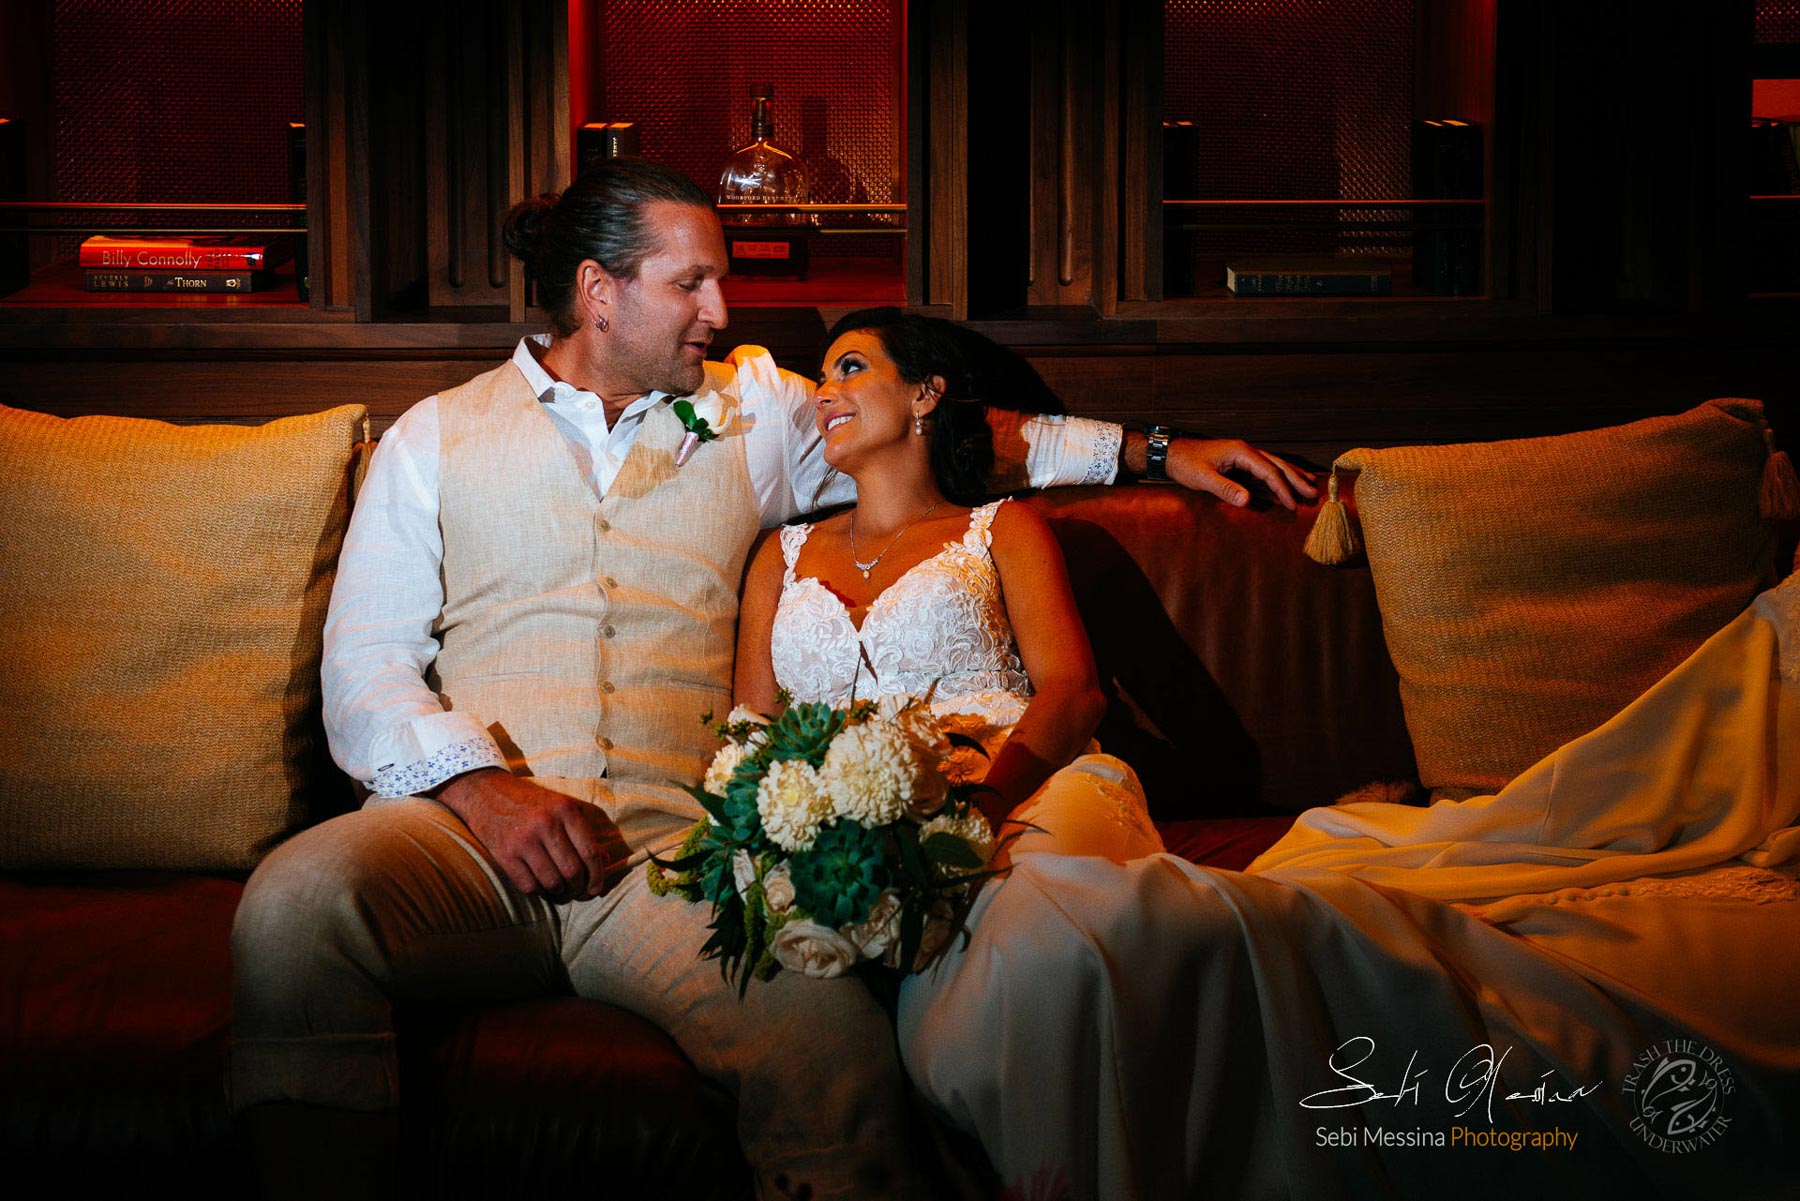 Post Wedding ceremony images in Mexico – Sebi Messina Photography